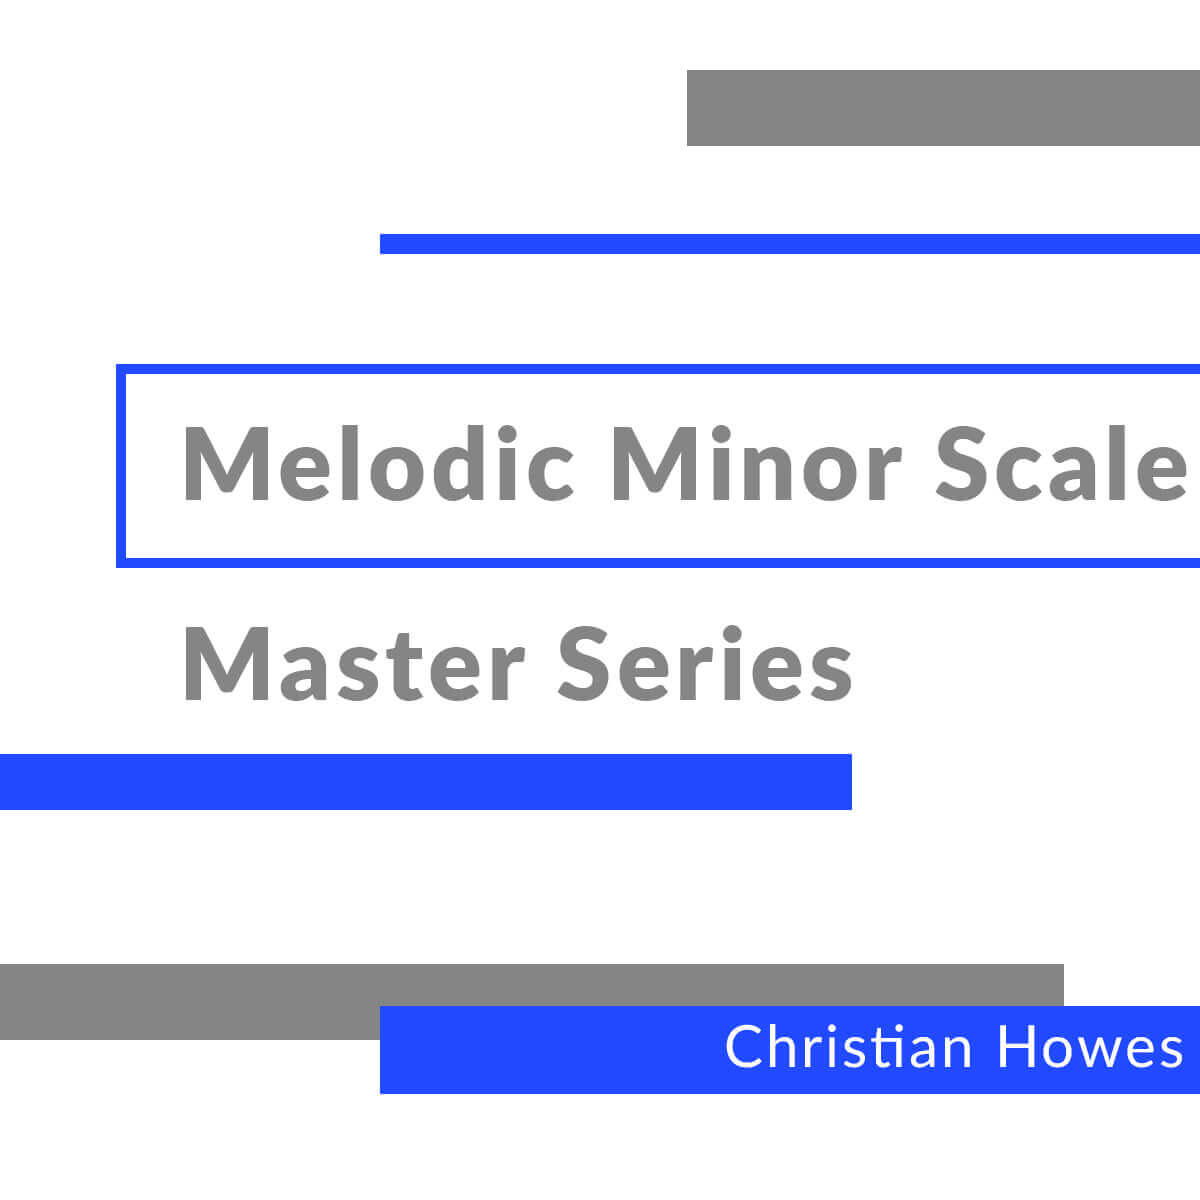 Melodic Minor Scale Master Series (Video Series + Additional Materials) 